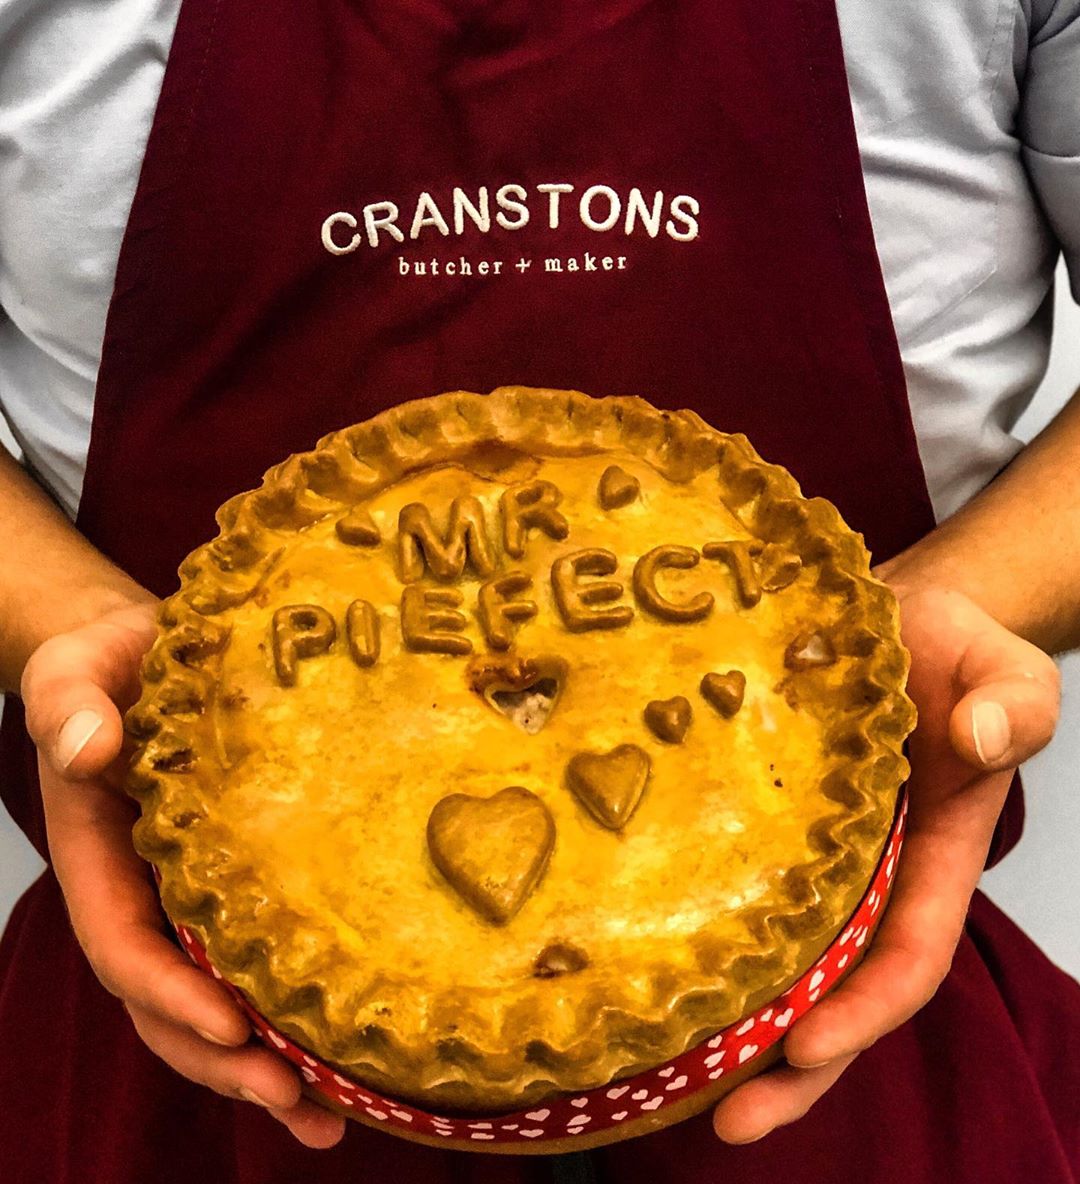 ❤️Surprise your Mr or Mrs ‘Pie-fect’ this Valentine’s Day with a unique gift! ❤️ Tag your loved one below and give them a hint 😉

These pork pies are LIMITED EDITION – restricted to a run of 10. 
See link in the bio ⬆️ For shop collection only